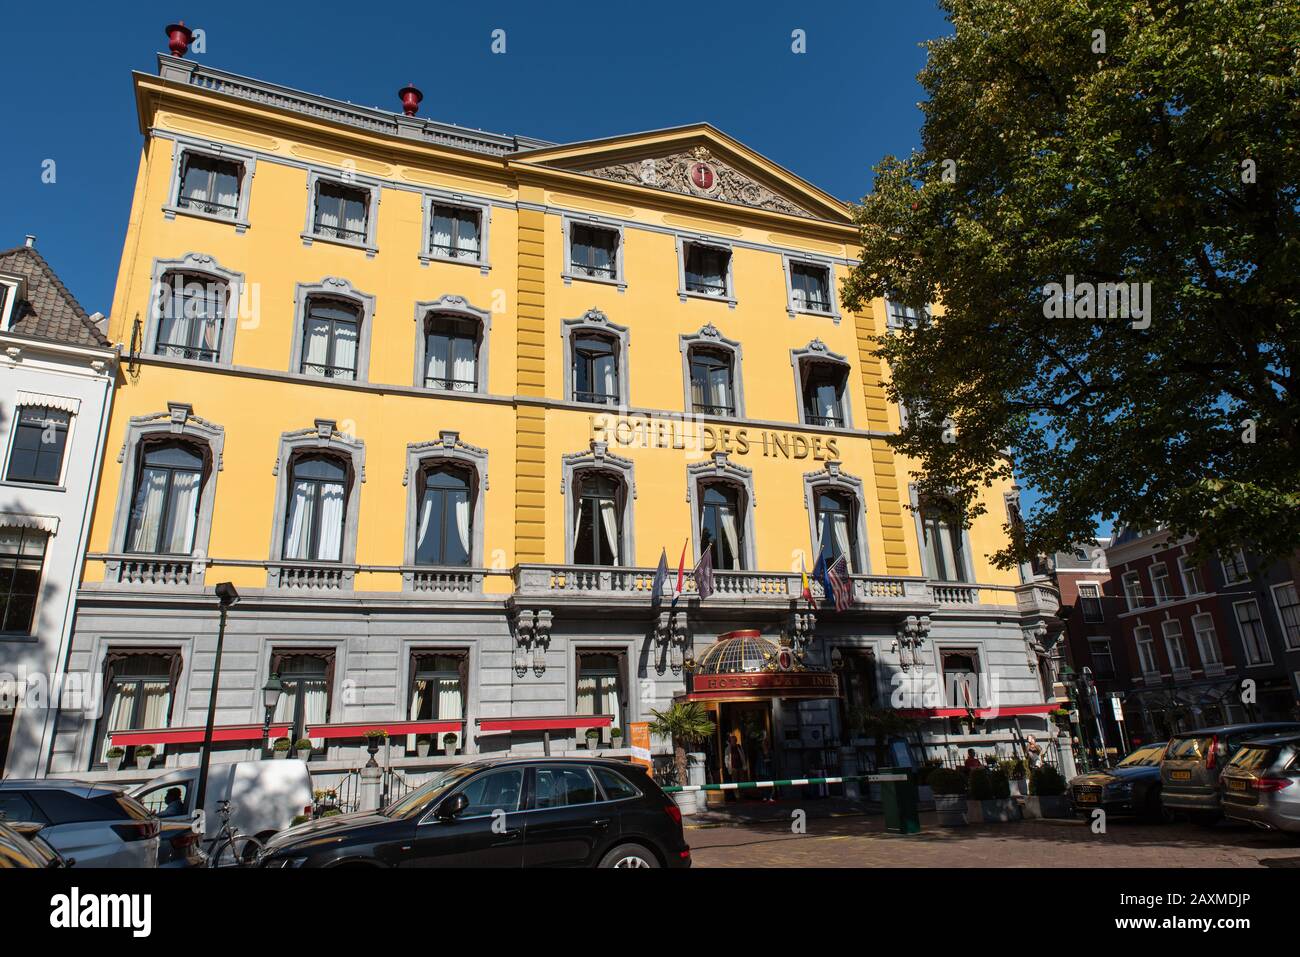 Hotel des Indes, The Hague, Netherlands, is a prestigious 5-star hotel. Stock Photo